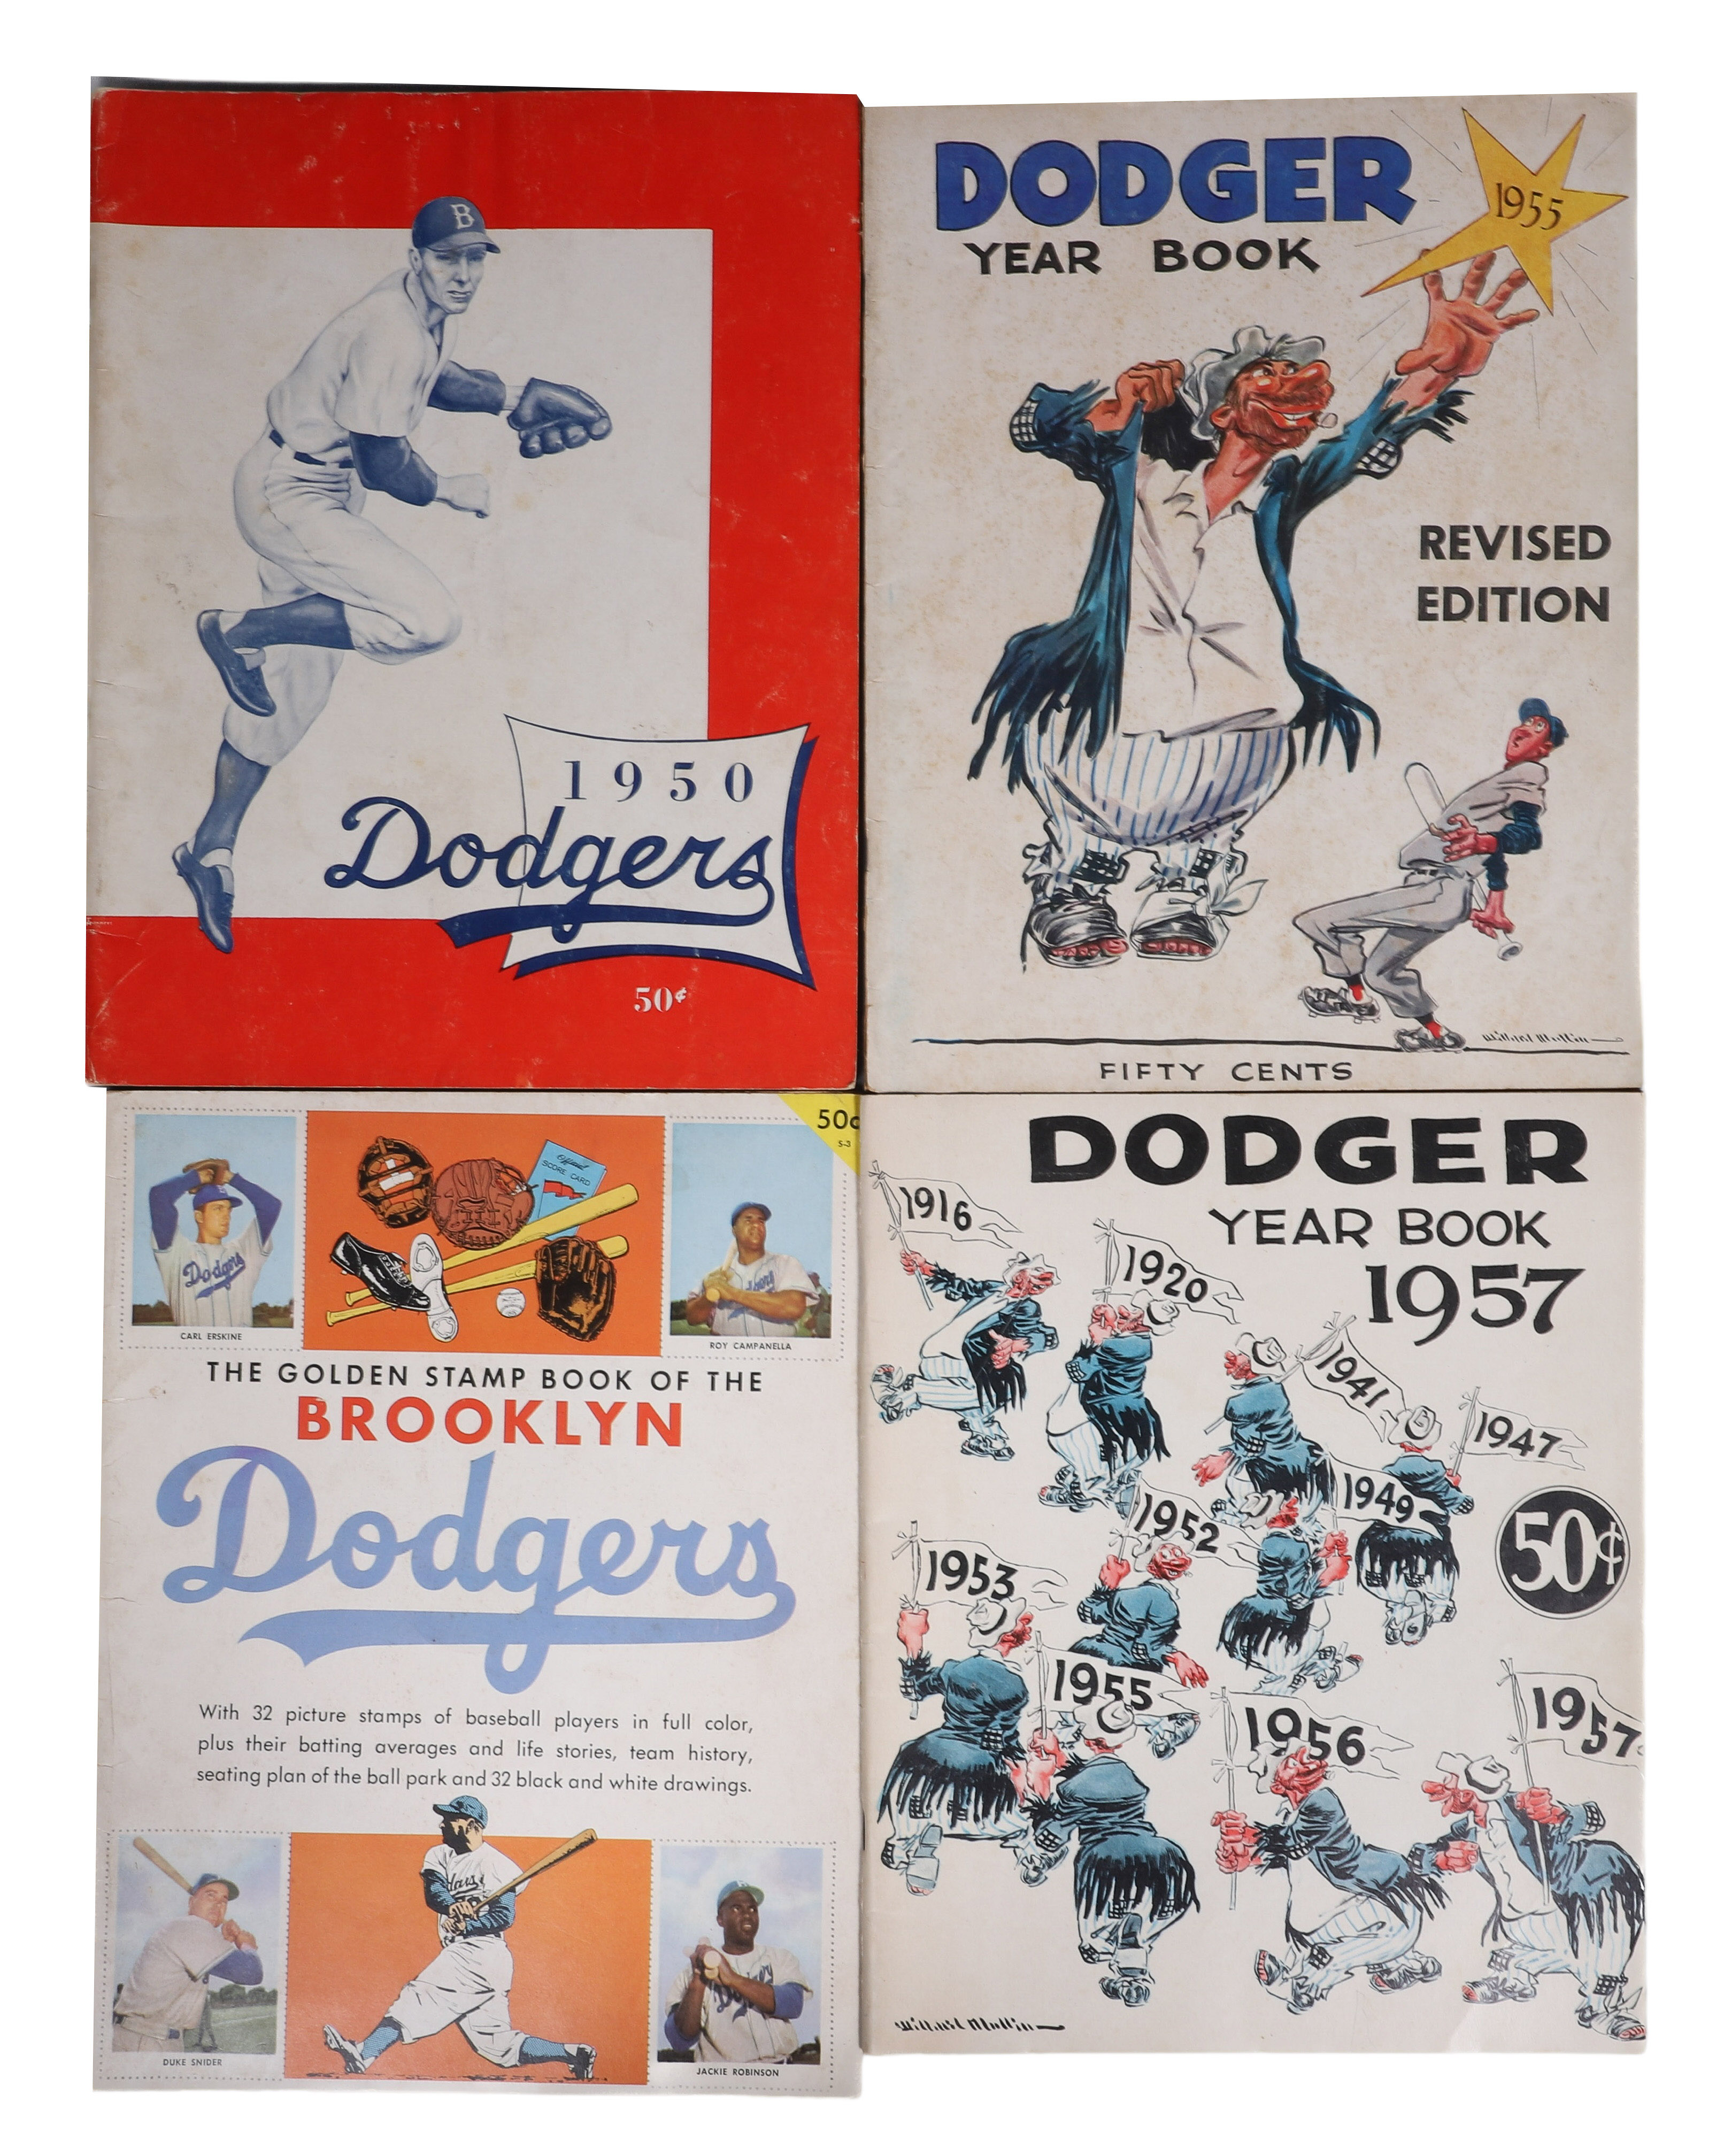 Brooklyn Dodger Yearbook and Publication